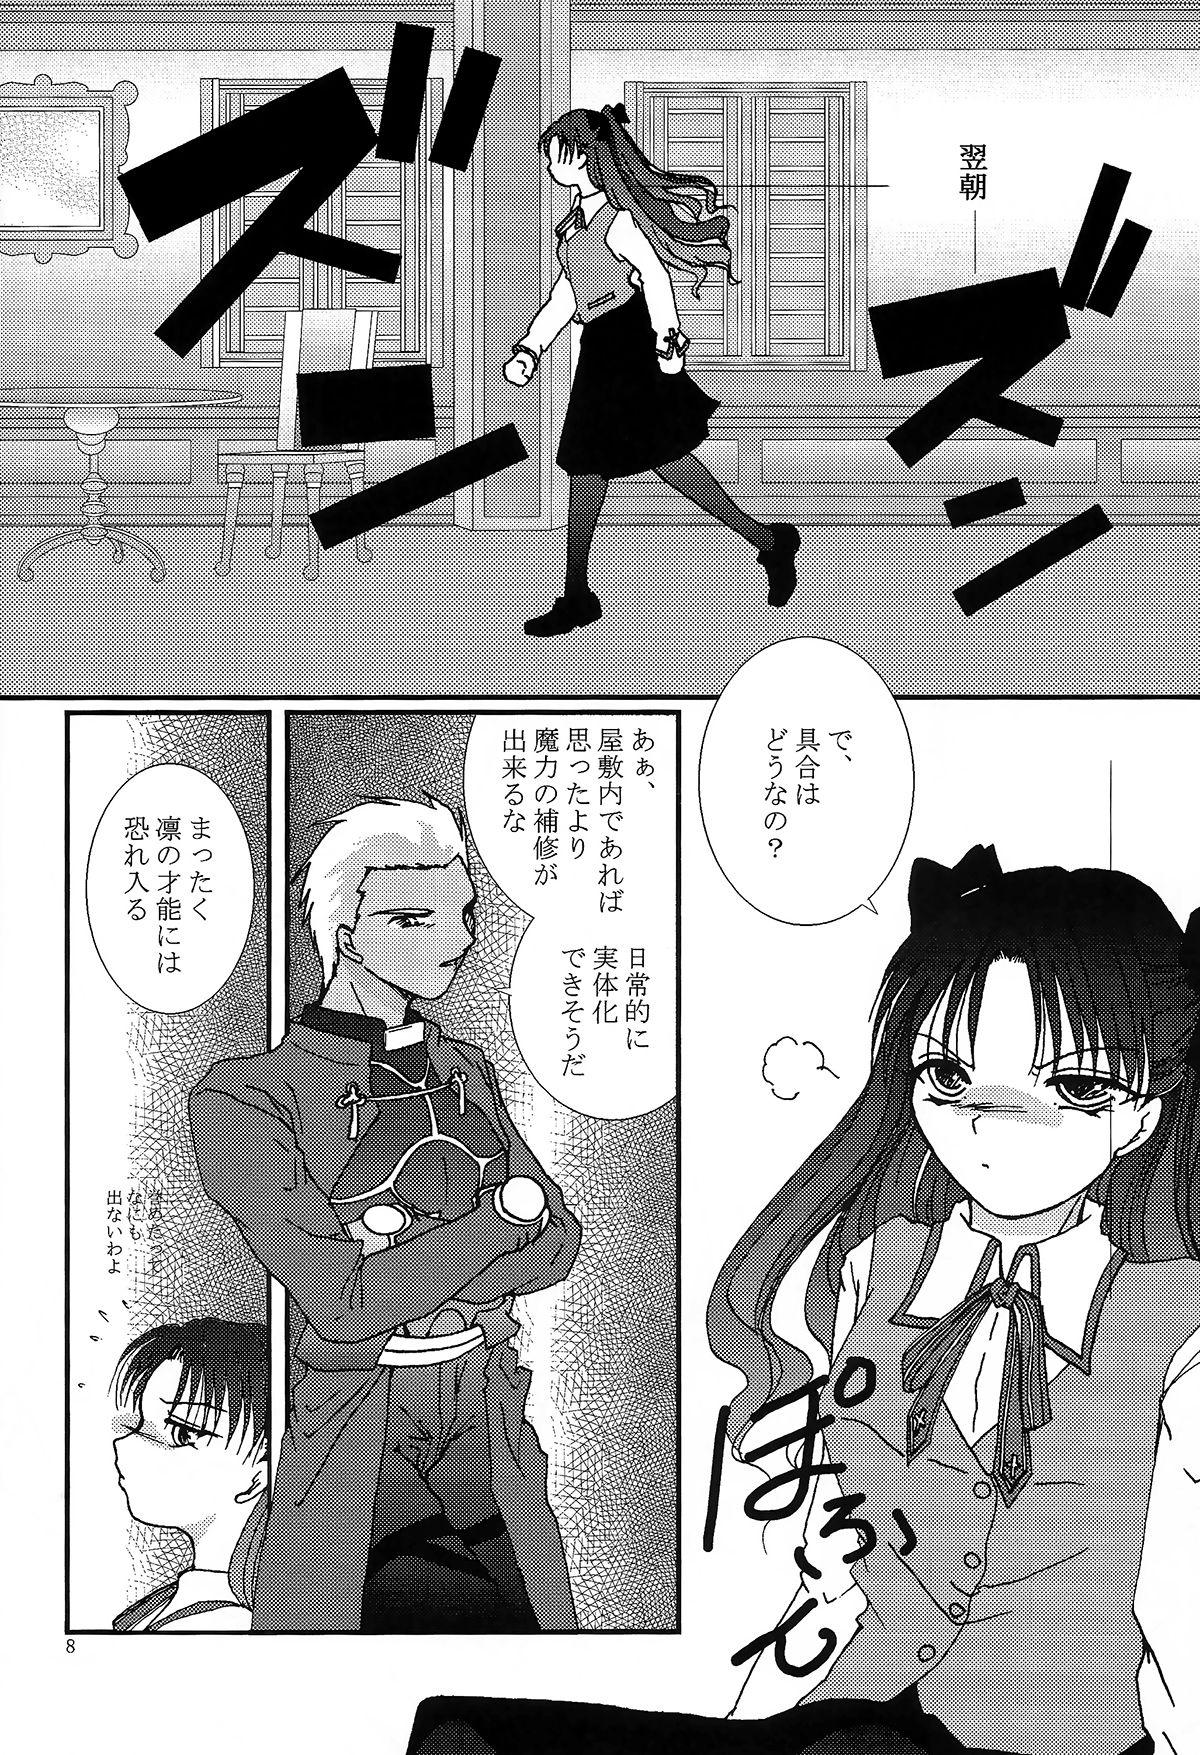 Oil Question-7 - Fate stay night Women Sucking Dicks - Page 6